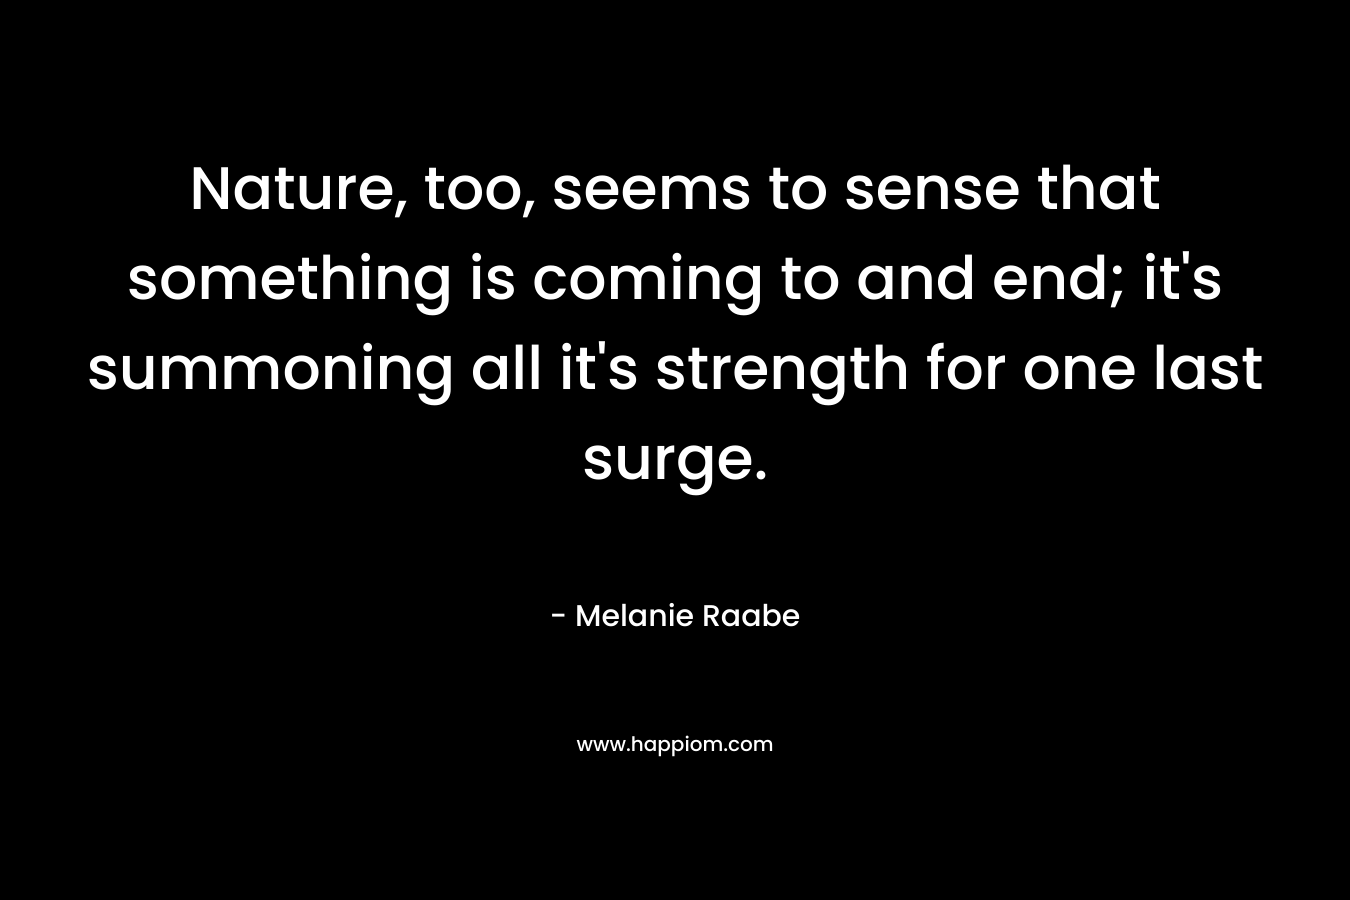 Nature, too, seems to sense that something is coming to and end; it’s summoning all it’s strength for one last surge. – Melanie Raabe